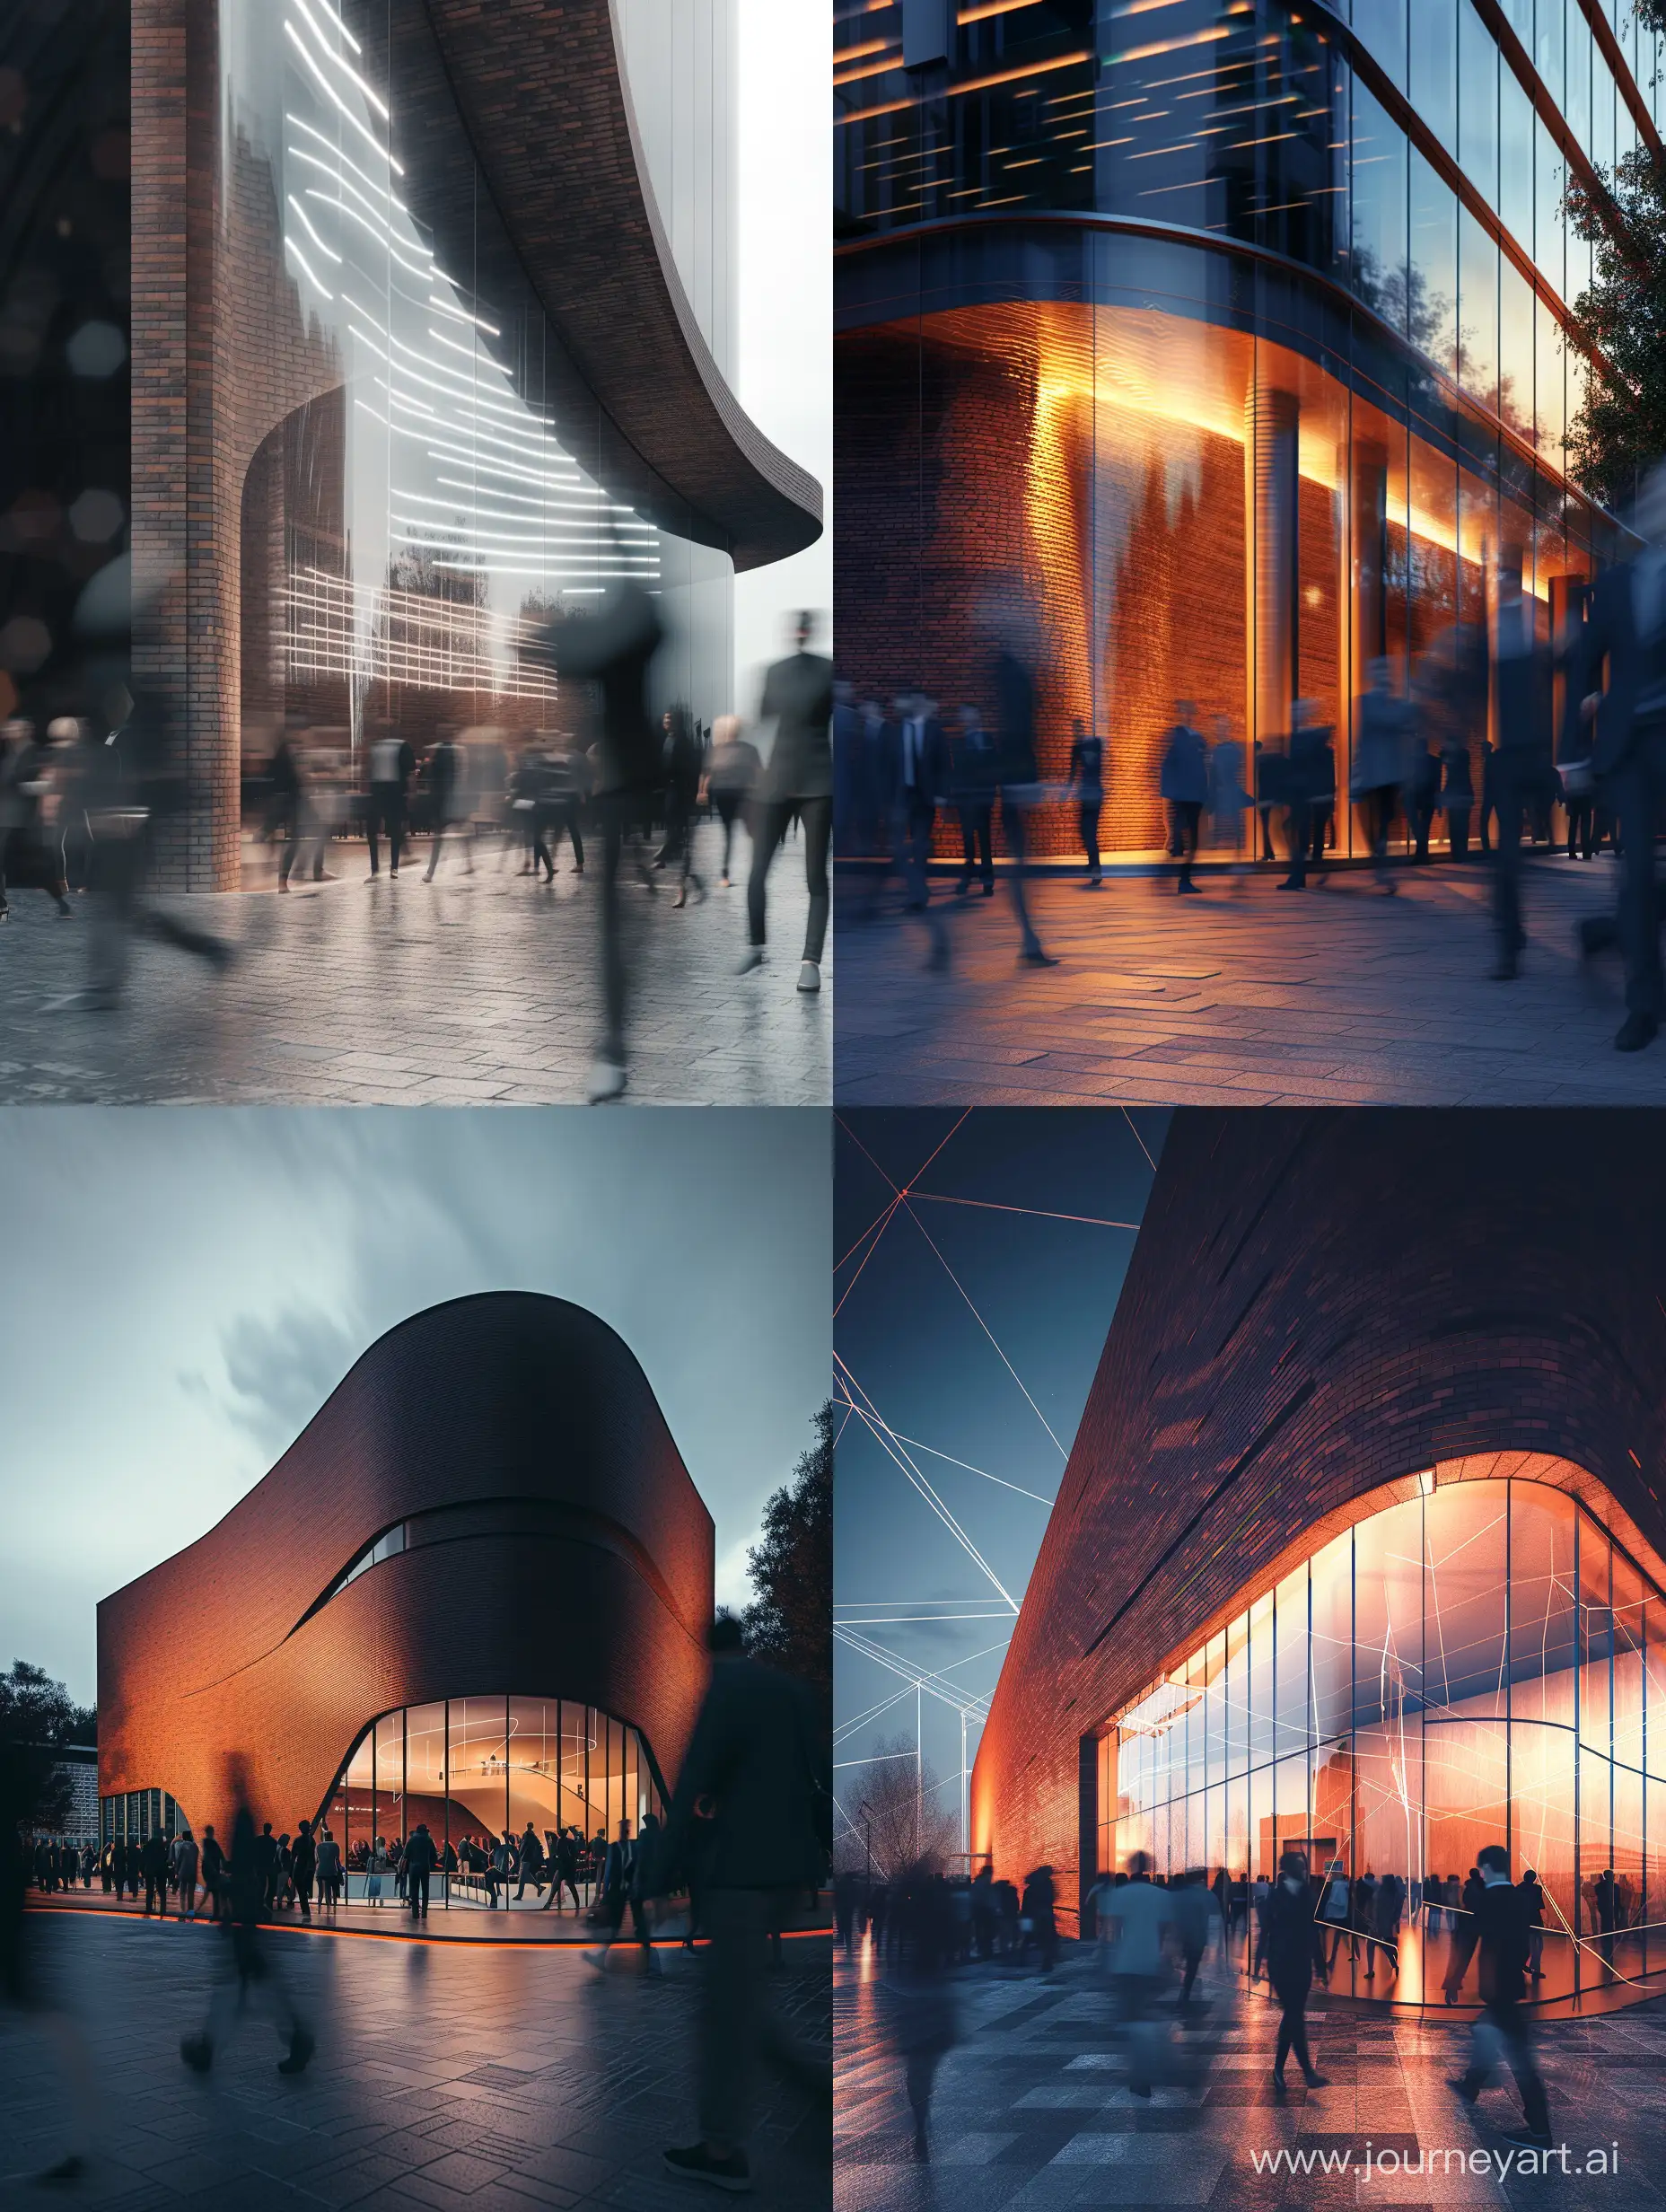 photorealistic, canon EOS 5d, minimalistic medium scale office building, curved brick, geometric shaped outline, expert, dramatic lighting, lighting effects, motion blurring walking crowd